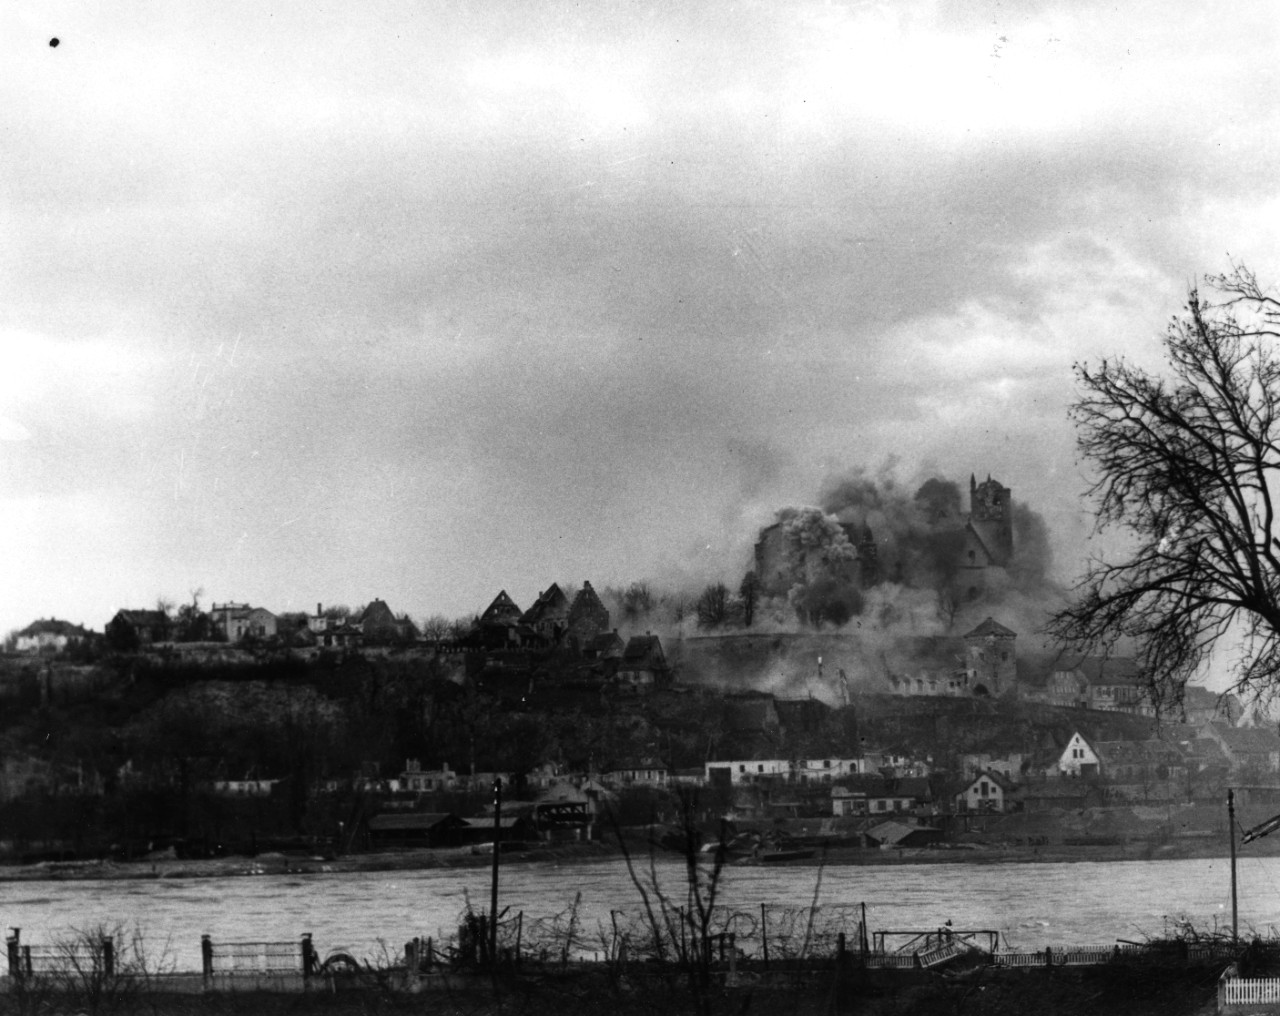 US Army 155mm howitzers hit a German observation post as US forces prepare to cross the Rhine River at Neuf Breisach, France, 13 February 1945. Town on the German side is probably Breisach.